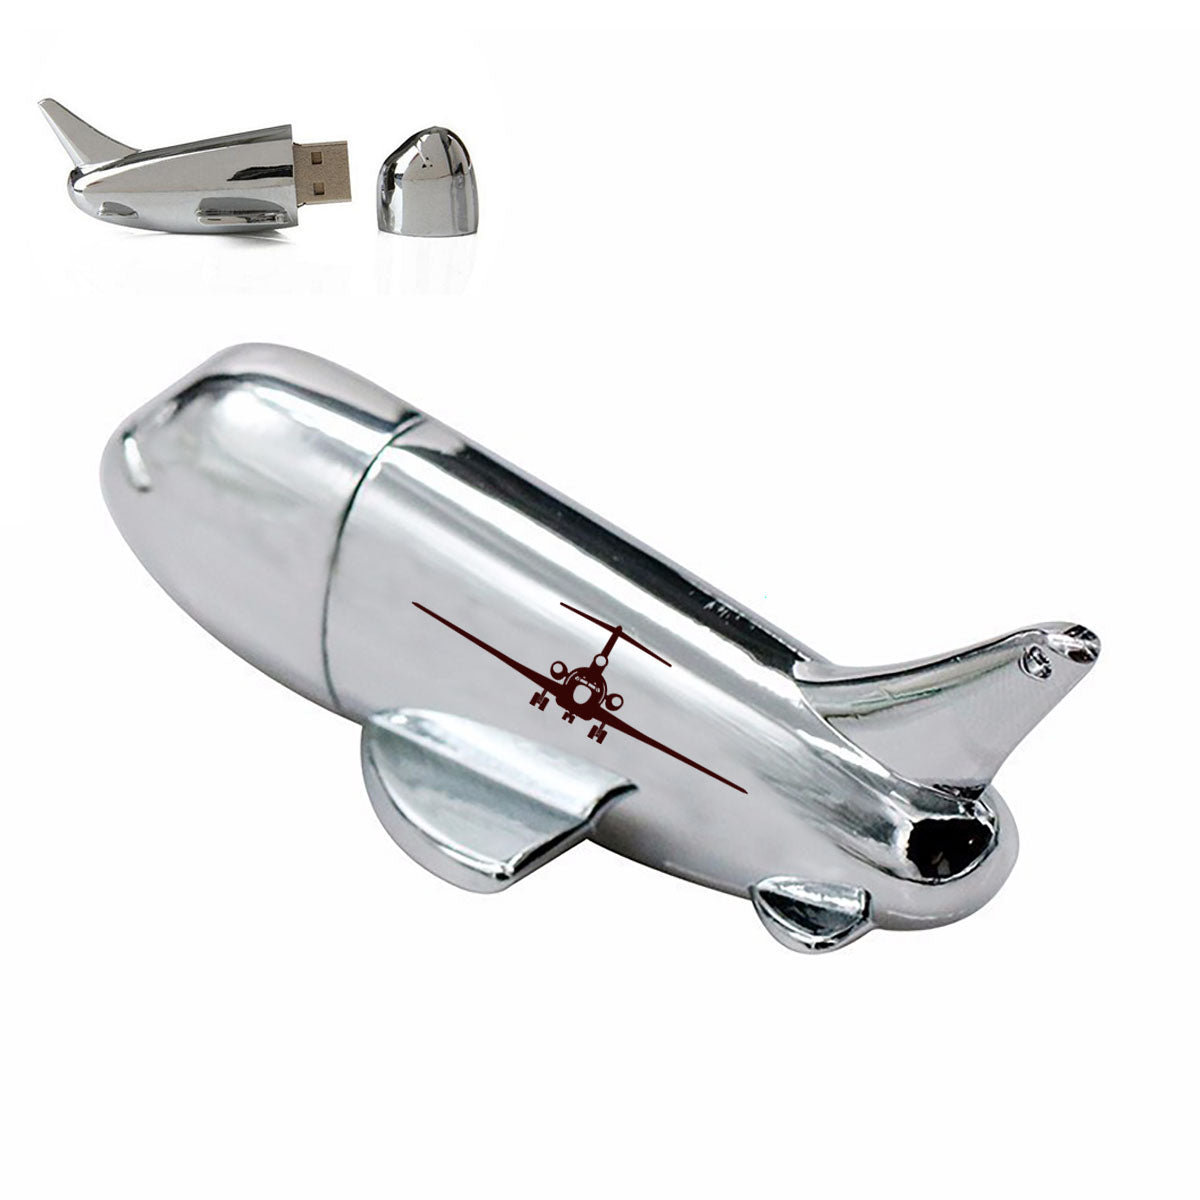 Boeing 727 Silhouette Designed Airplane Shape USB Drives